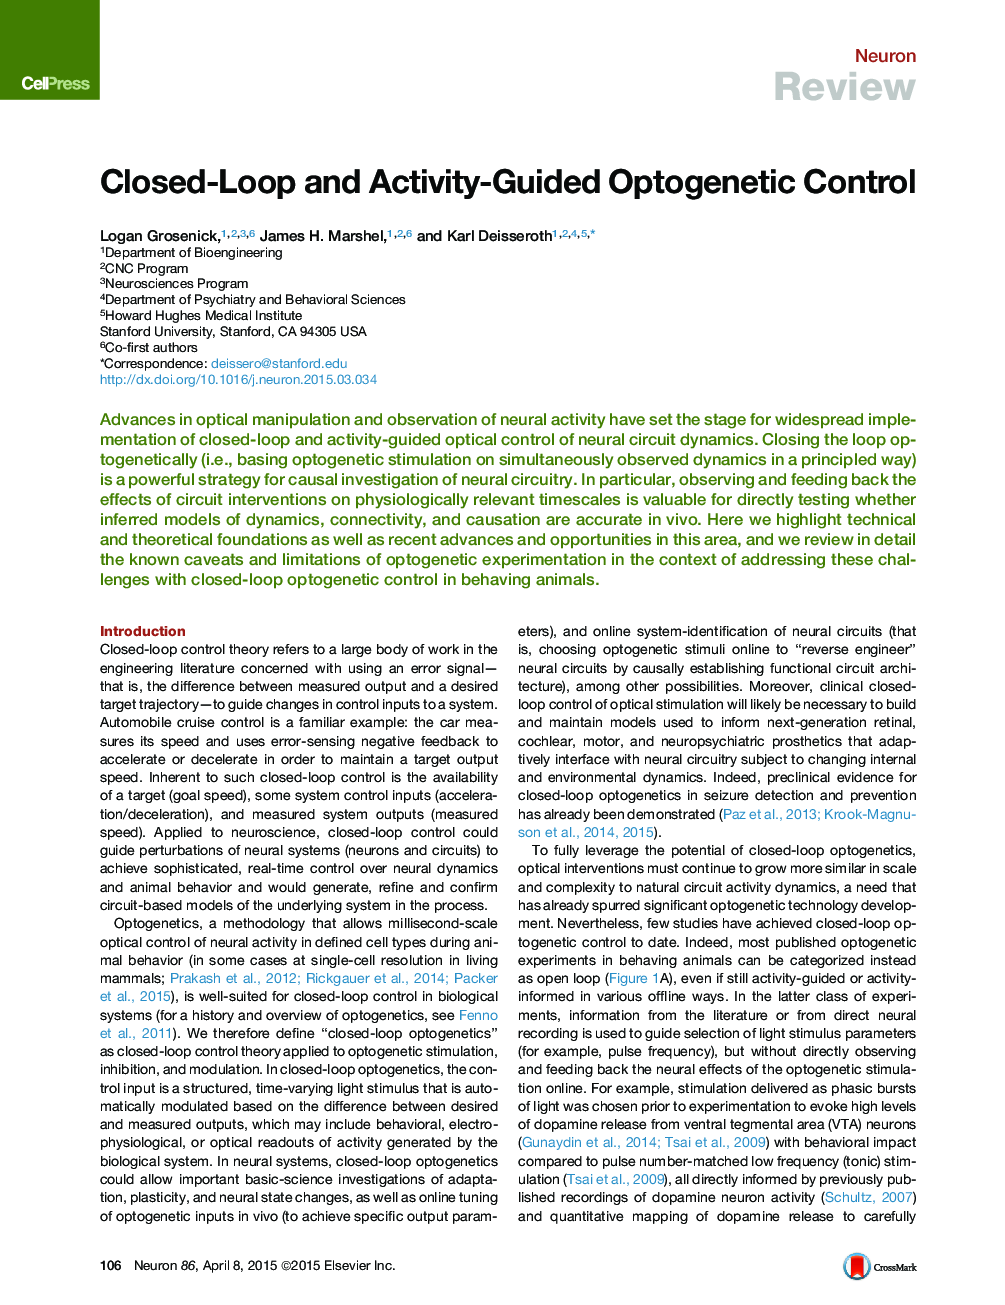 Closed-Loop and Activity-Guided Optogenetic Control